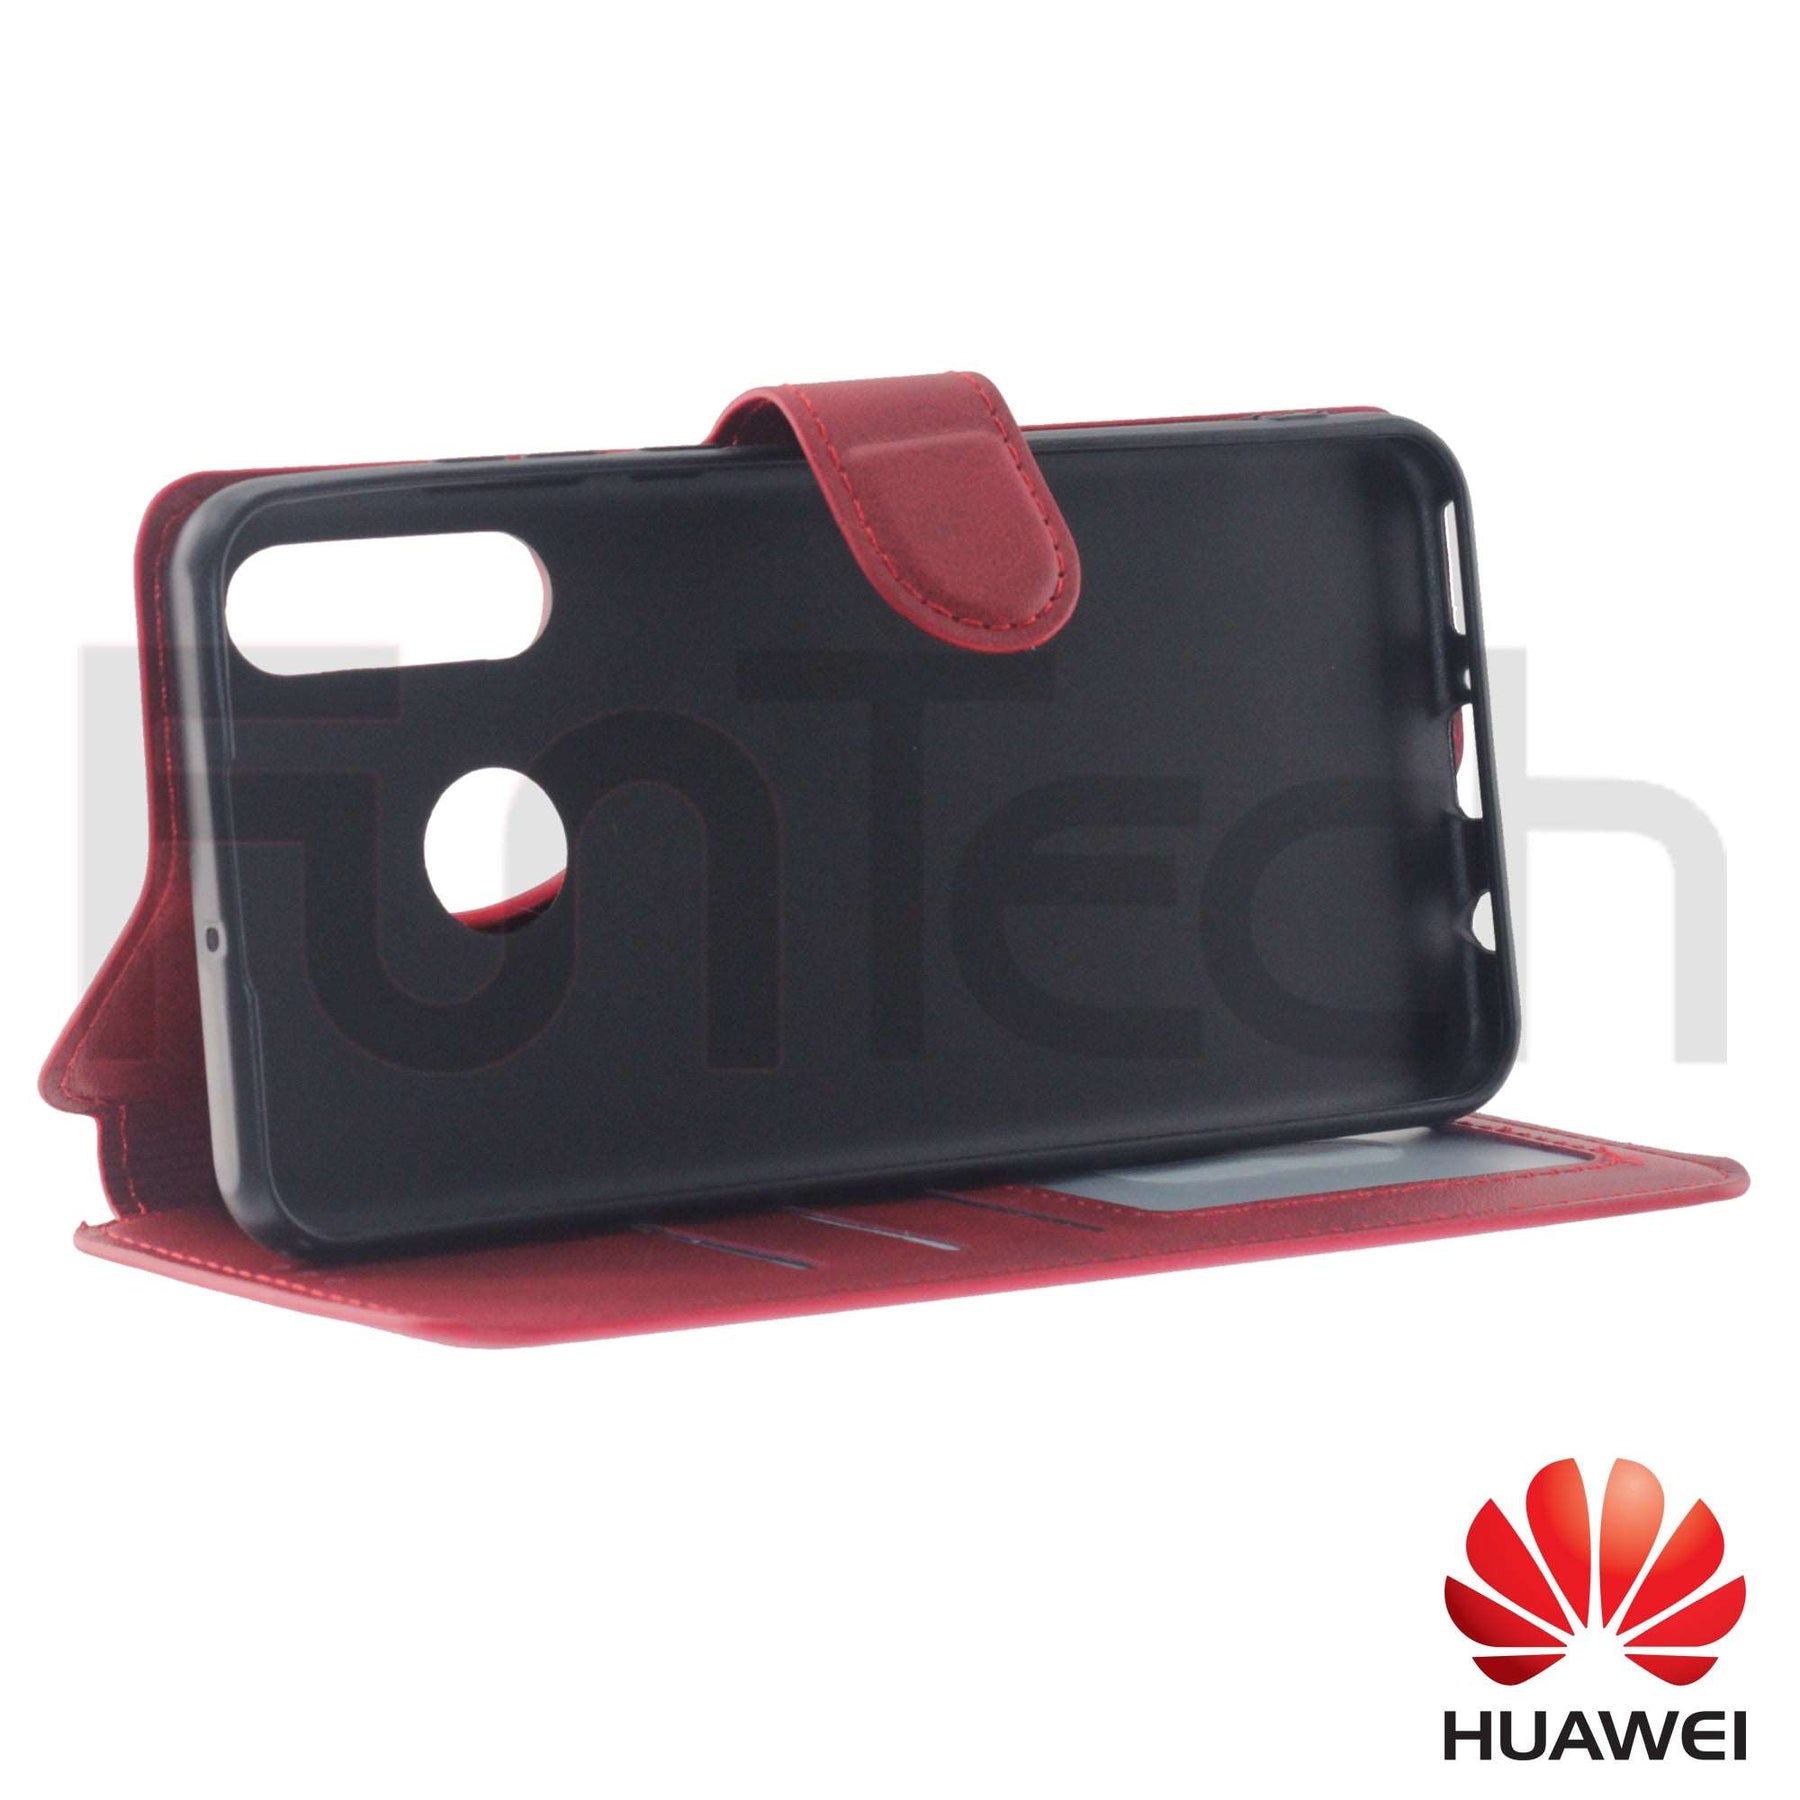 Huawei, P30 Lite, Leather Wallet Case, Color Red.